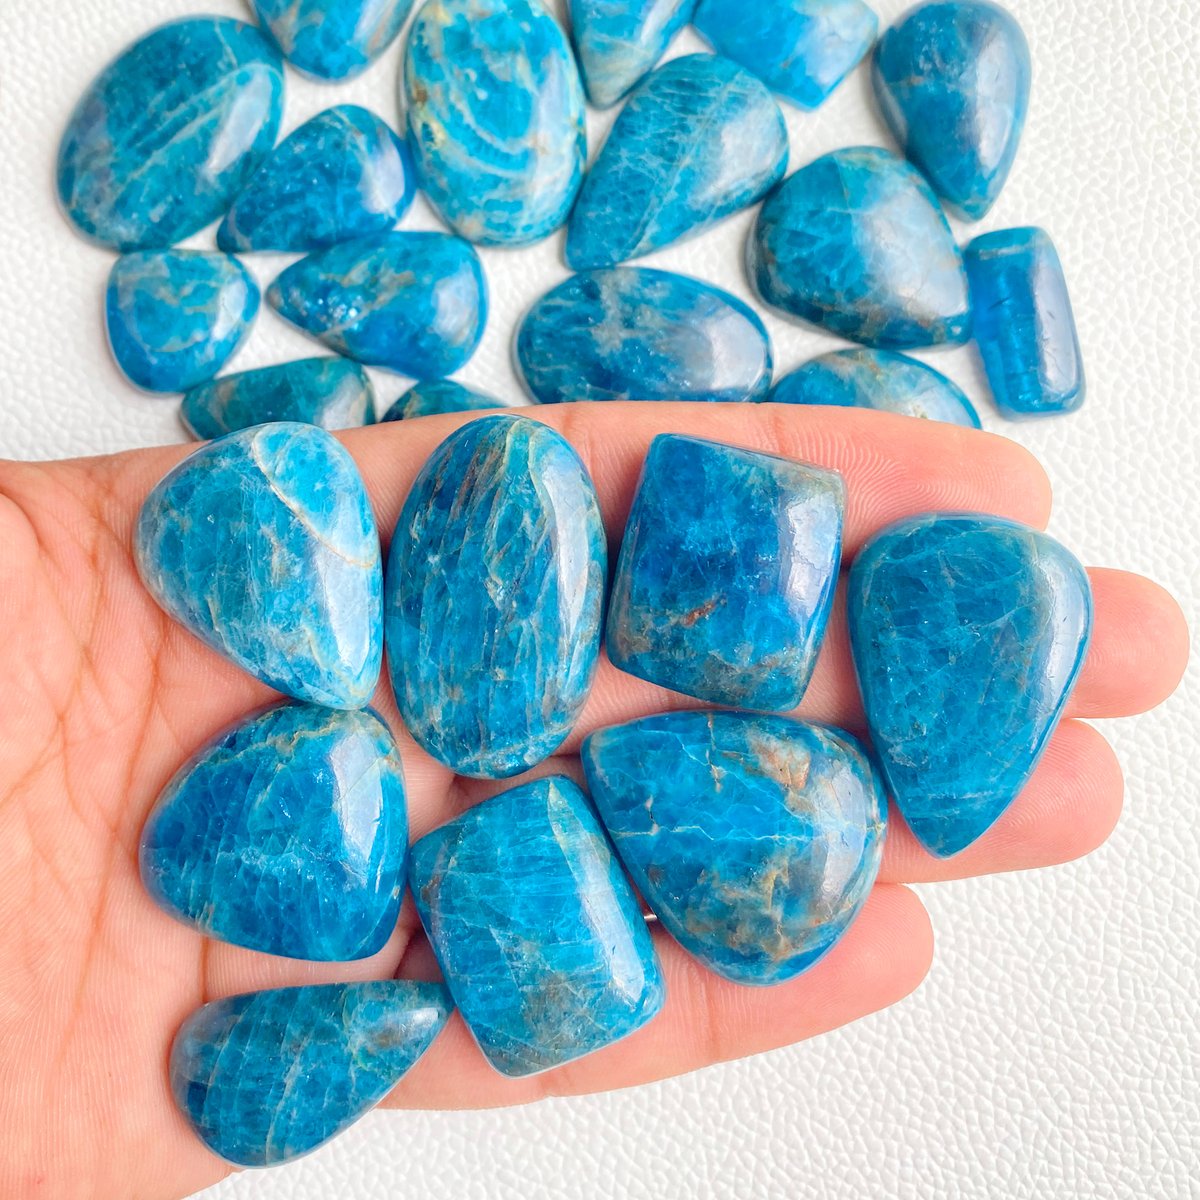 Natural Apatite Gemstone 

We accept payment through PayPal/Bank Transfer
• 100% secure checkout with PayPal/Bank Transfer

#gemstone #cabochon #jewelrystone #naturalstone #loosegemstone #crystalgemstone #healinggemstone #apatite #apatitejewelry #apatitependant #apatitestone